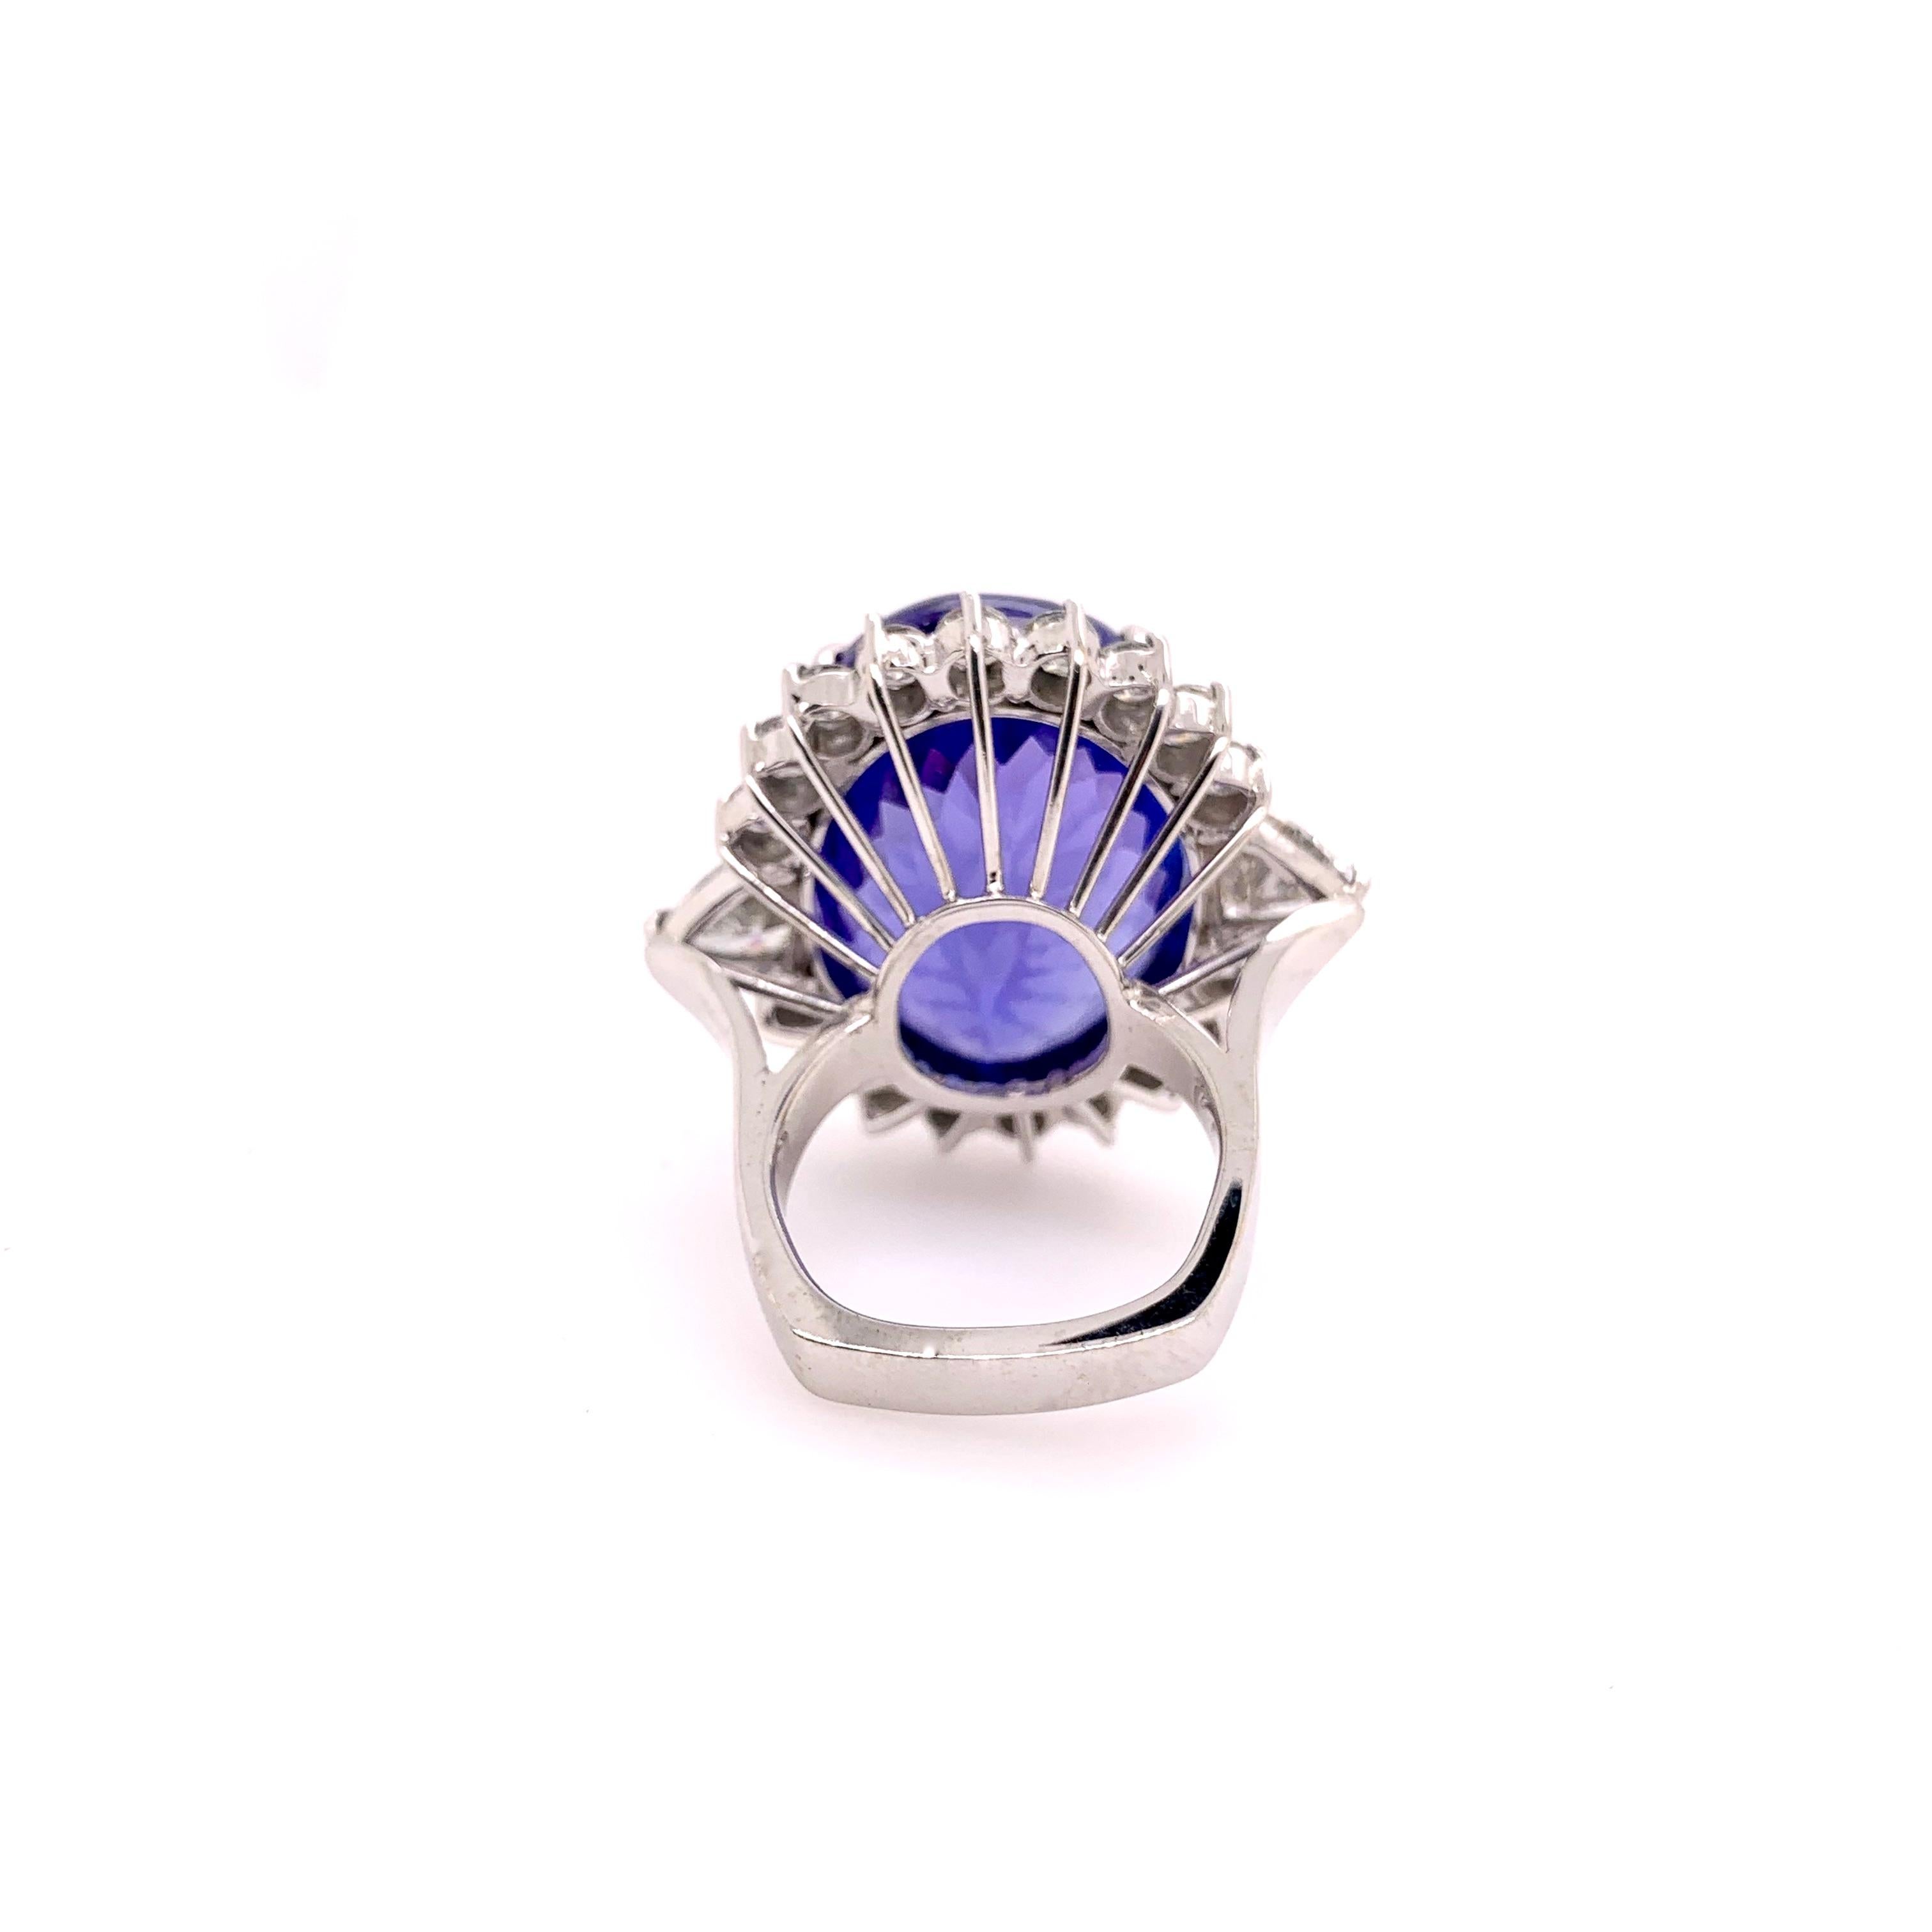 Stunning 18k white gold tanzanite ring with generous size diamonds to compliment the gigantic center stone.  The oval tanzanite weighs 50.33 cts. and is top quality with amazing red and purple flashes.  The side has two 1.00 ct trillion diamonds on